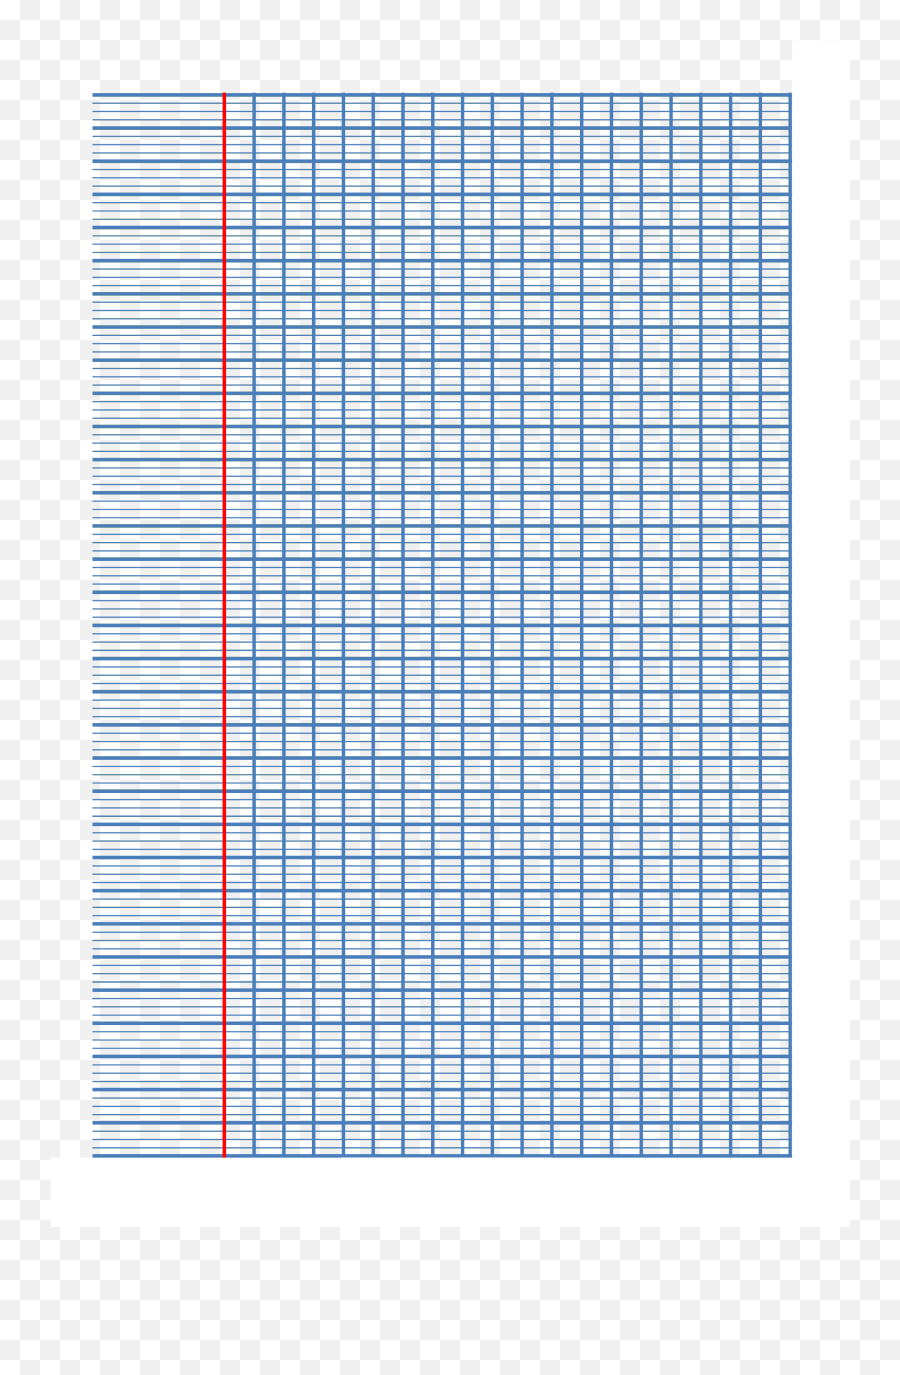 French Ruled Paper A4 - Seyes Ruled Paper Template Png,Lined Paper Png